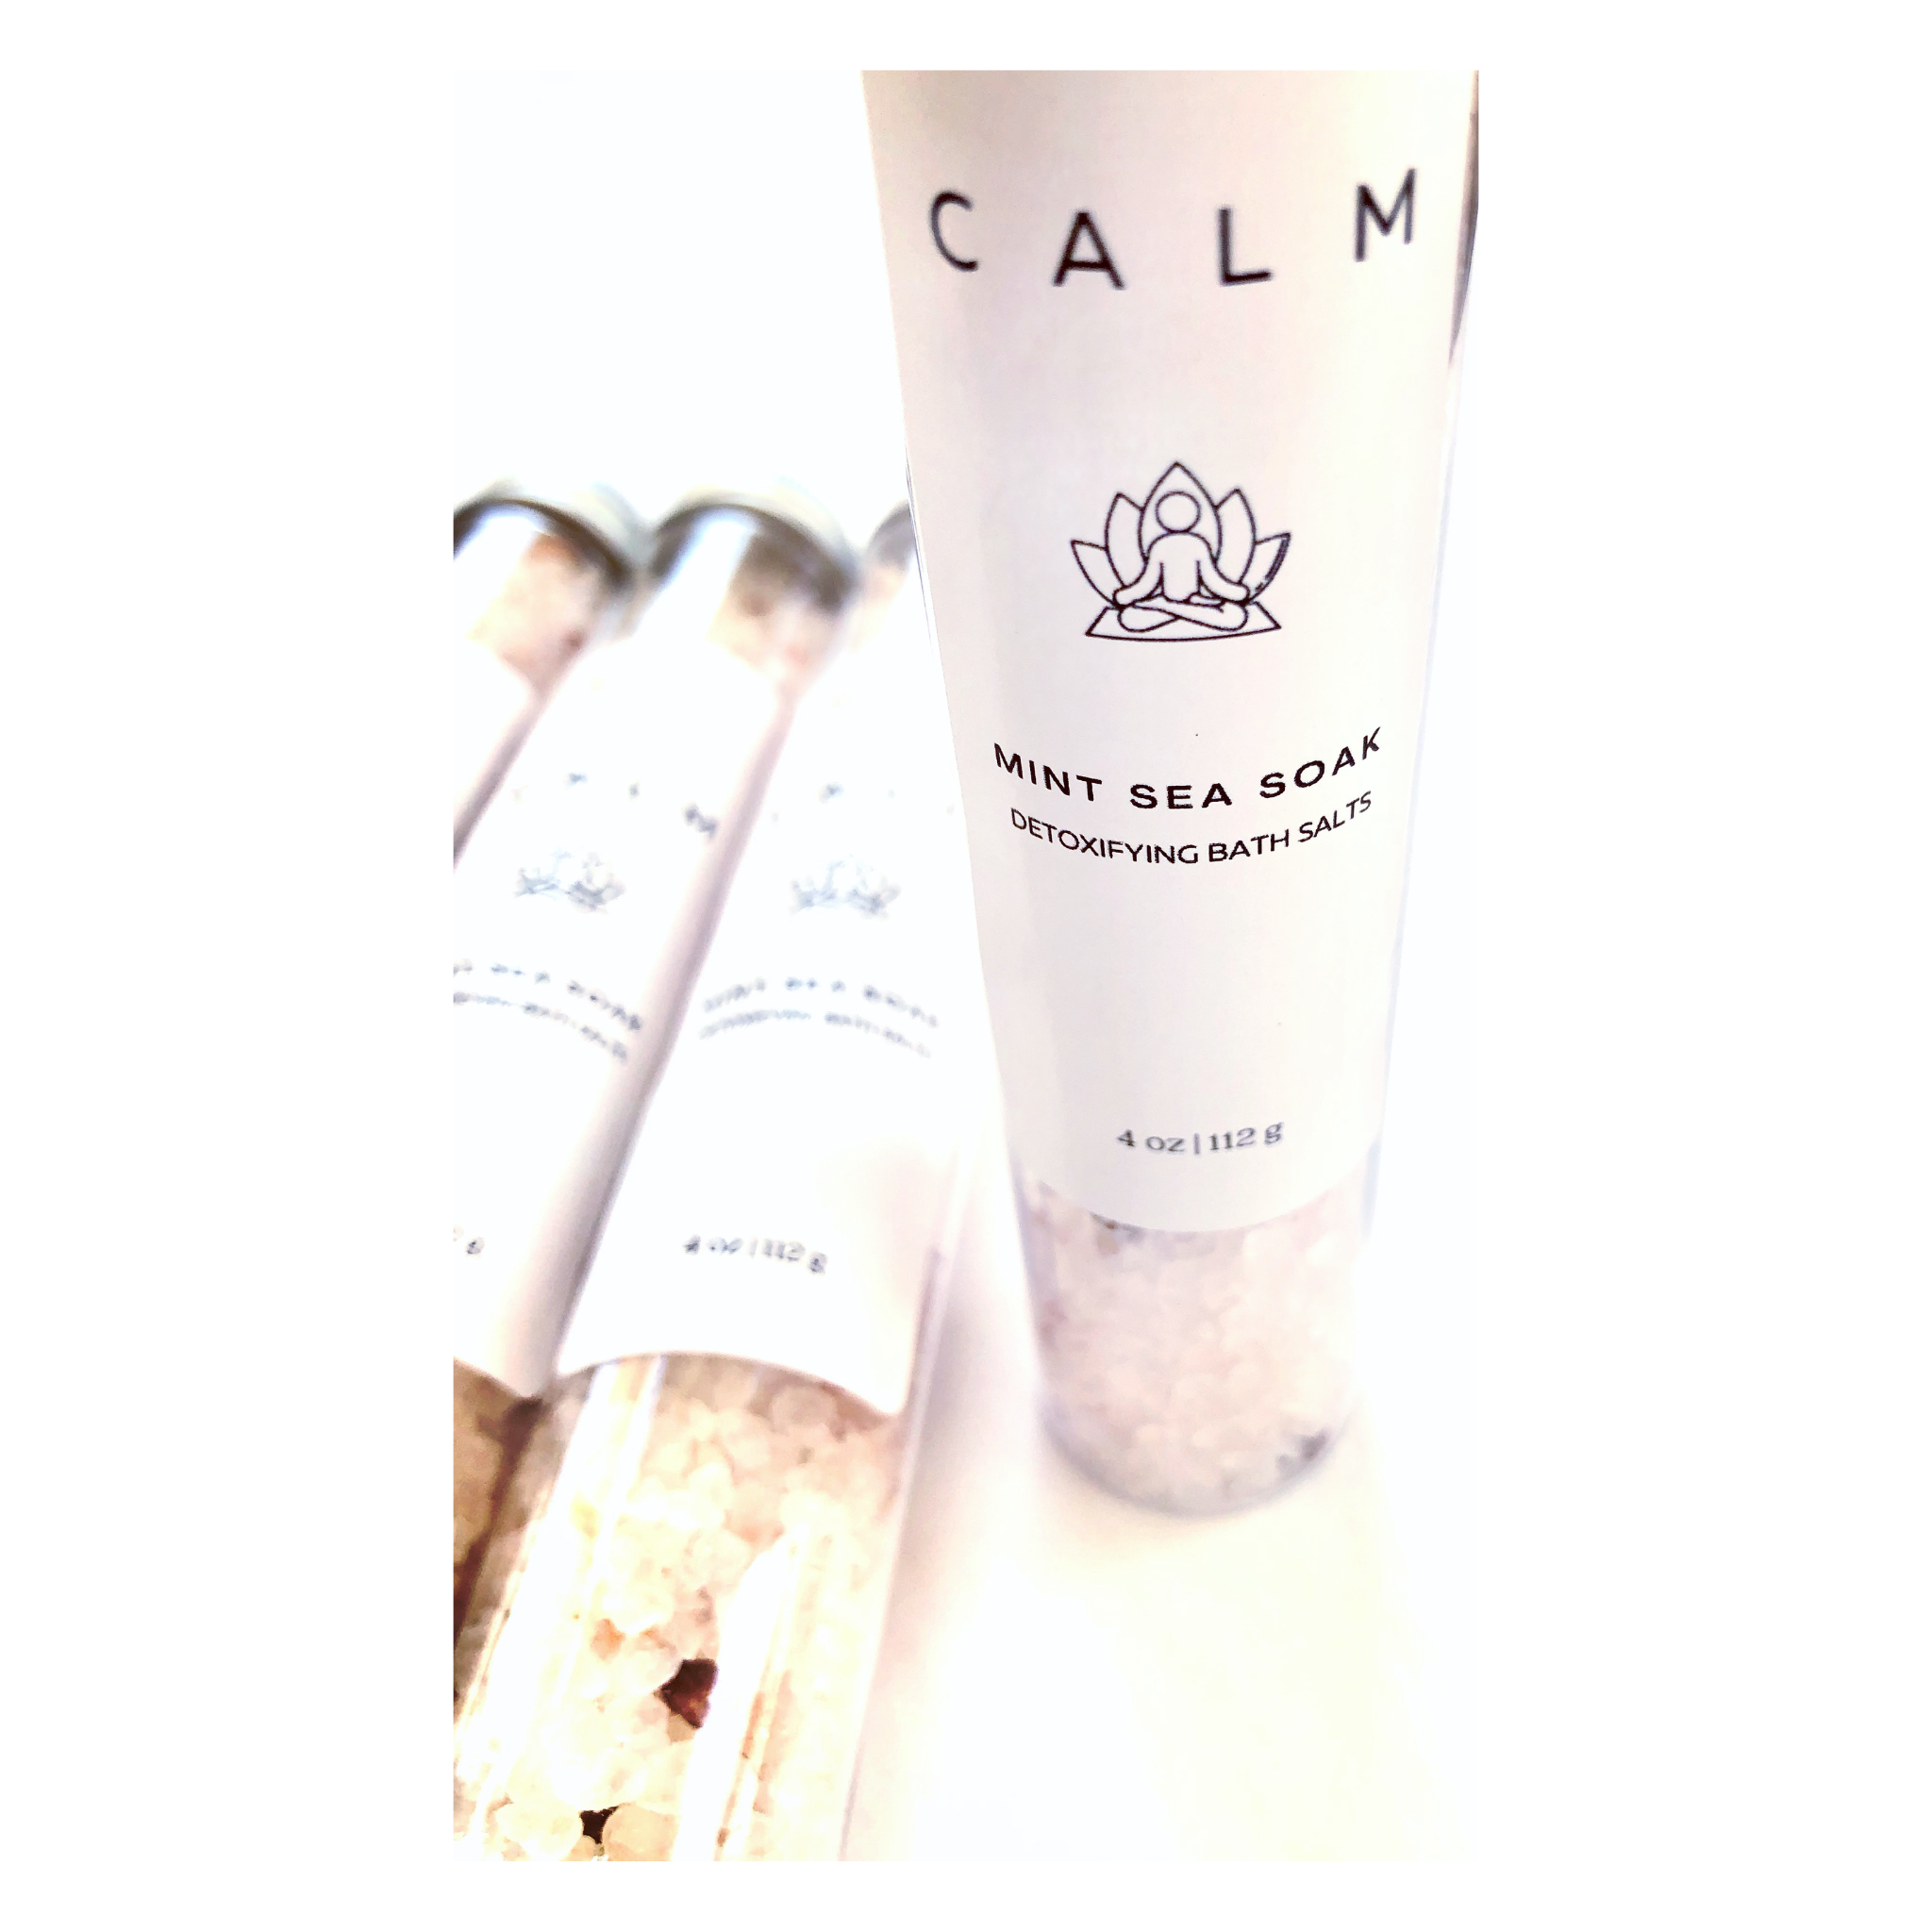 Our luxurious detoxifying bath soak is made from authentic Dead Sea Salt, Himalyan Pink Salt, Epsom Salt and plant based essential oils. The beautiful bath crystals come in a clear test tube and infuse bath water with essential oils which not only soften the skin, but also promote a sense of positivity